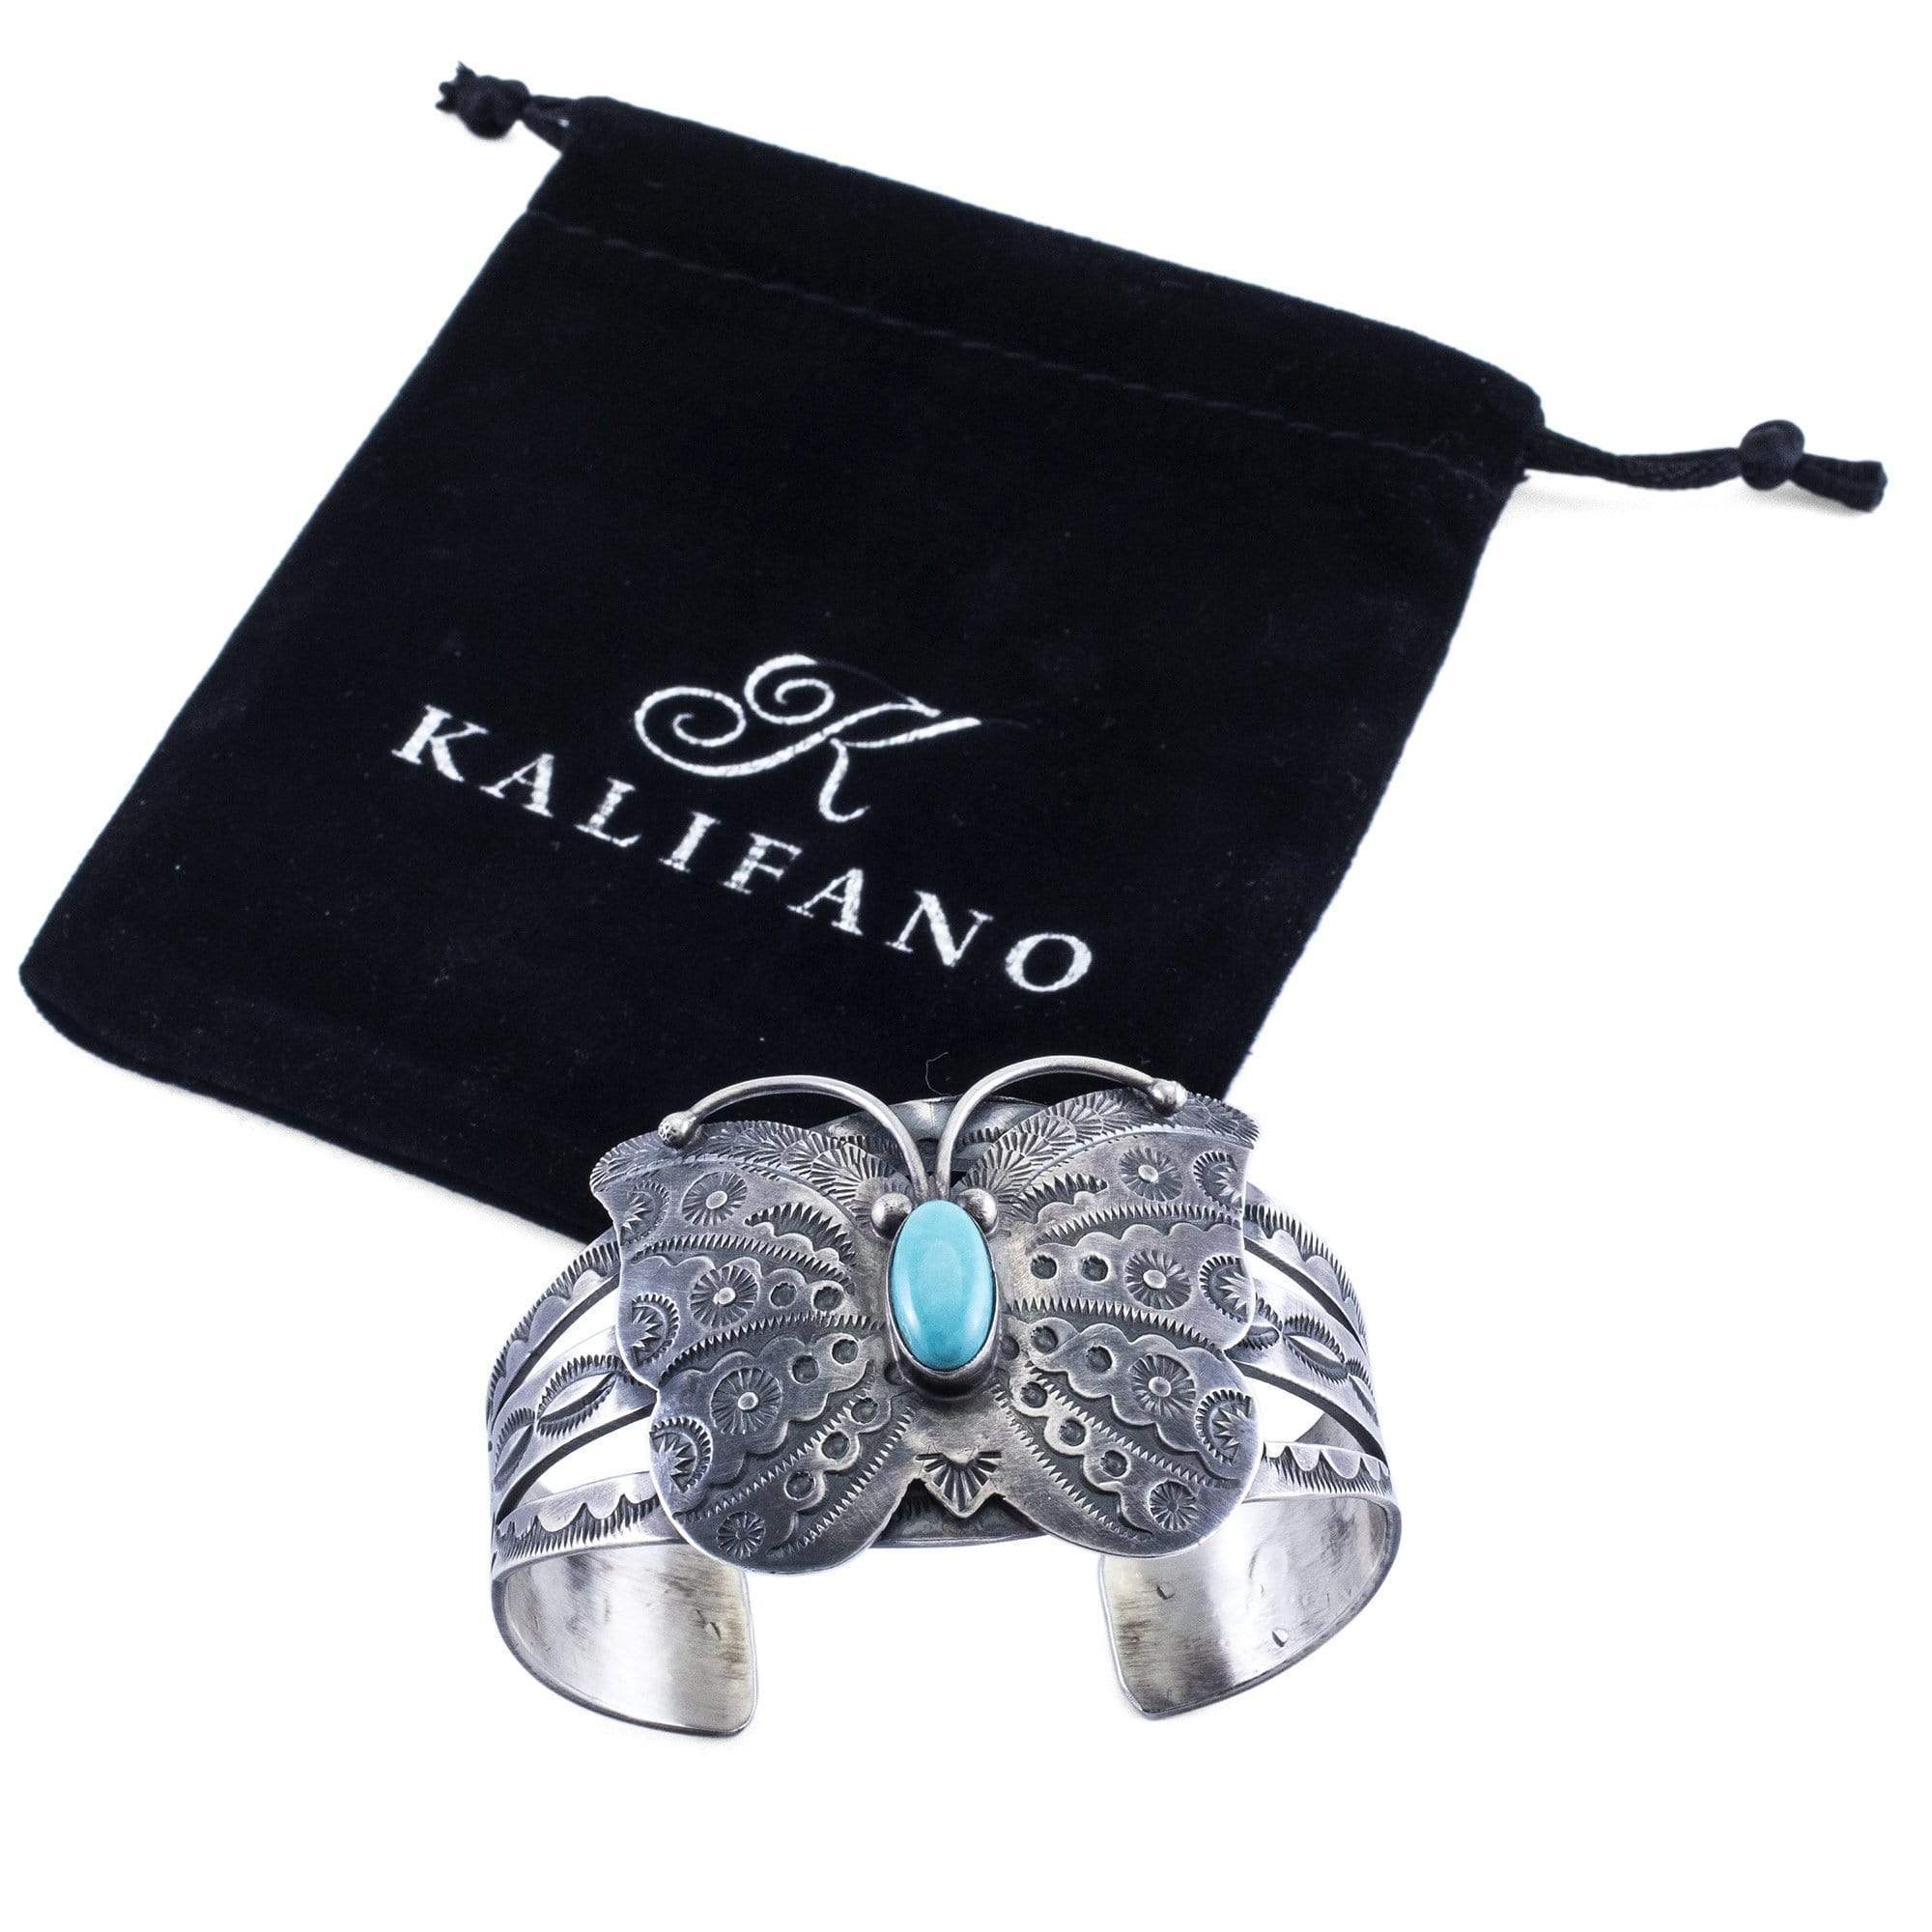 Kalifano Native American Jewelry D. Johnson Campitos Turquoise USA Native American Made 925 Sterling Silver Butterfly Cuff NAB1500.002